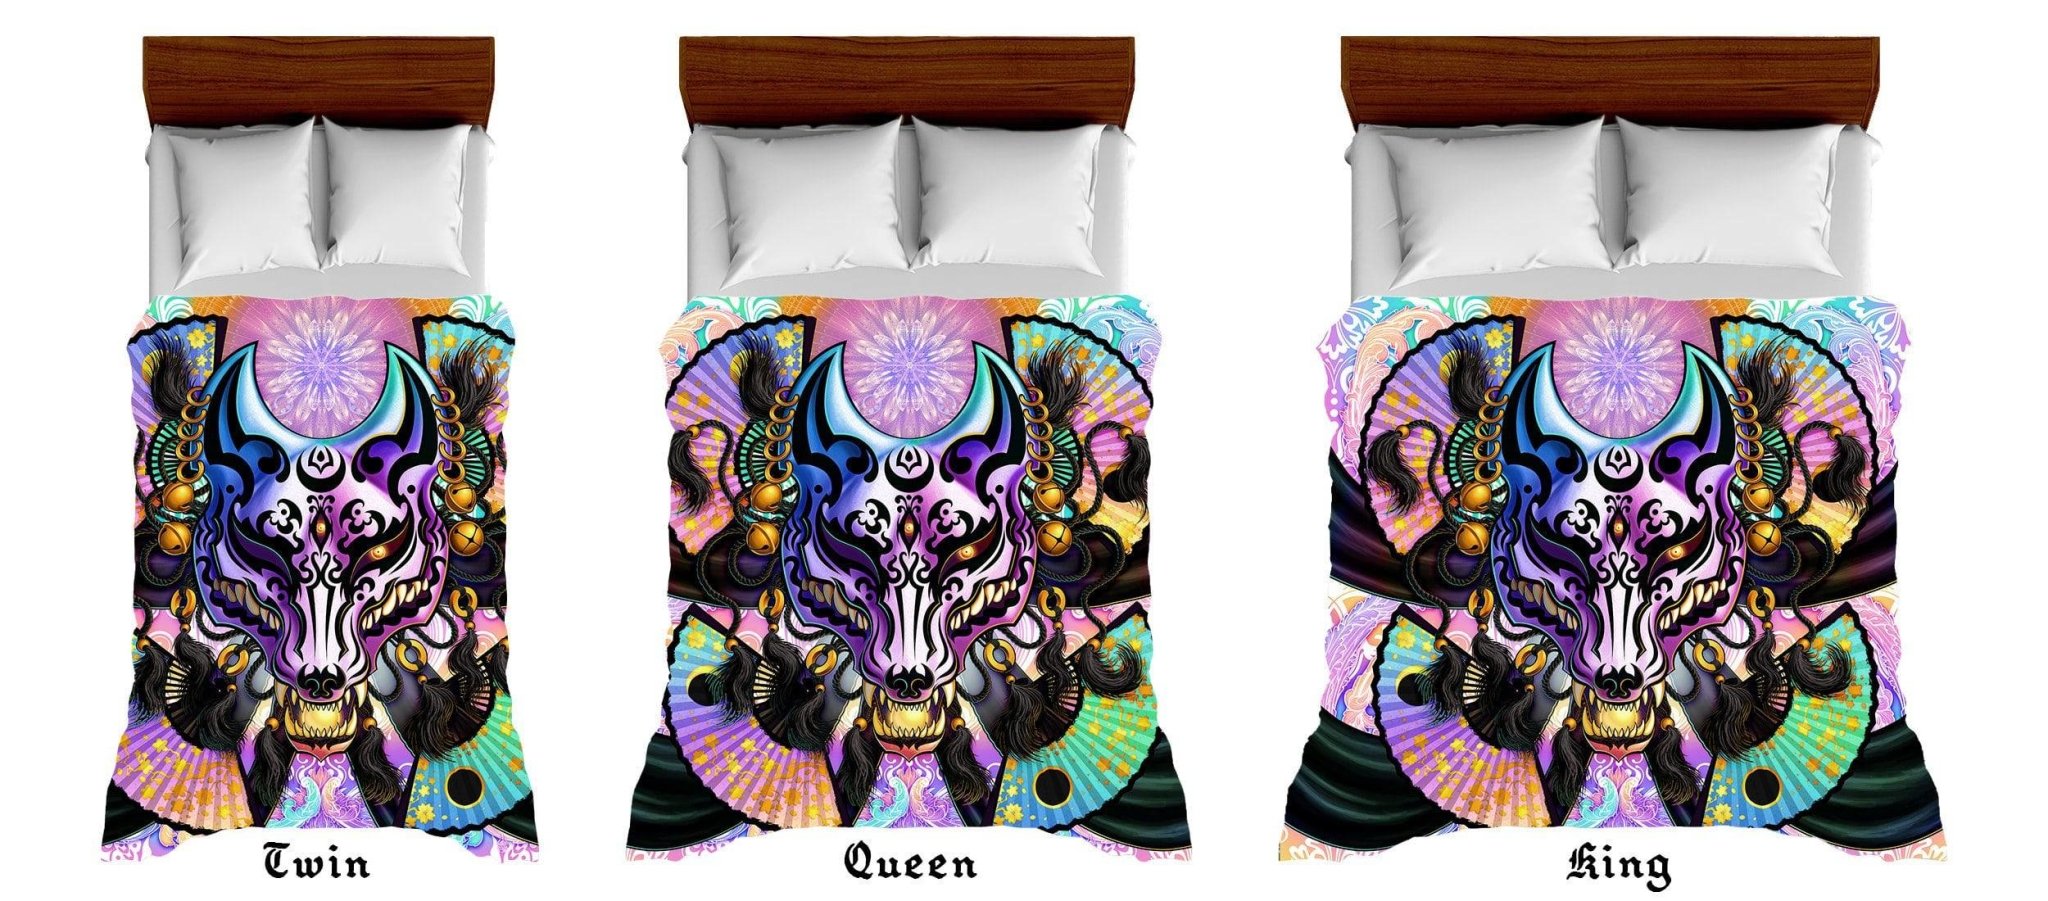 Pastel Punk Kitsune Mask Bedding Set, Comforter and Duvet, Fox Okami, Anime Art, Aesthetic Bed Cover, Kawaii Gamer Bedroom Decor, King, Queen and Twin Size - Black - Abysm Internal